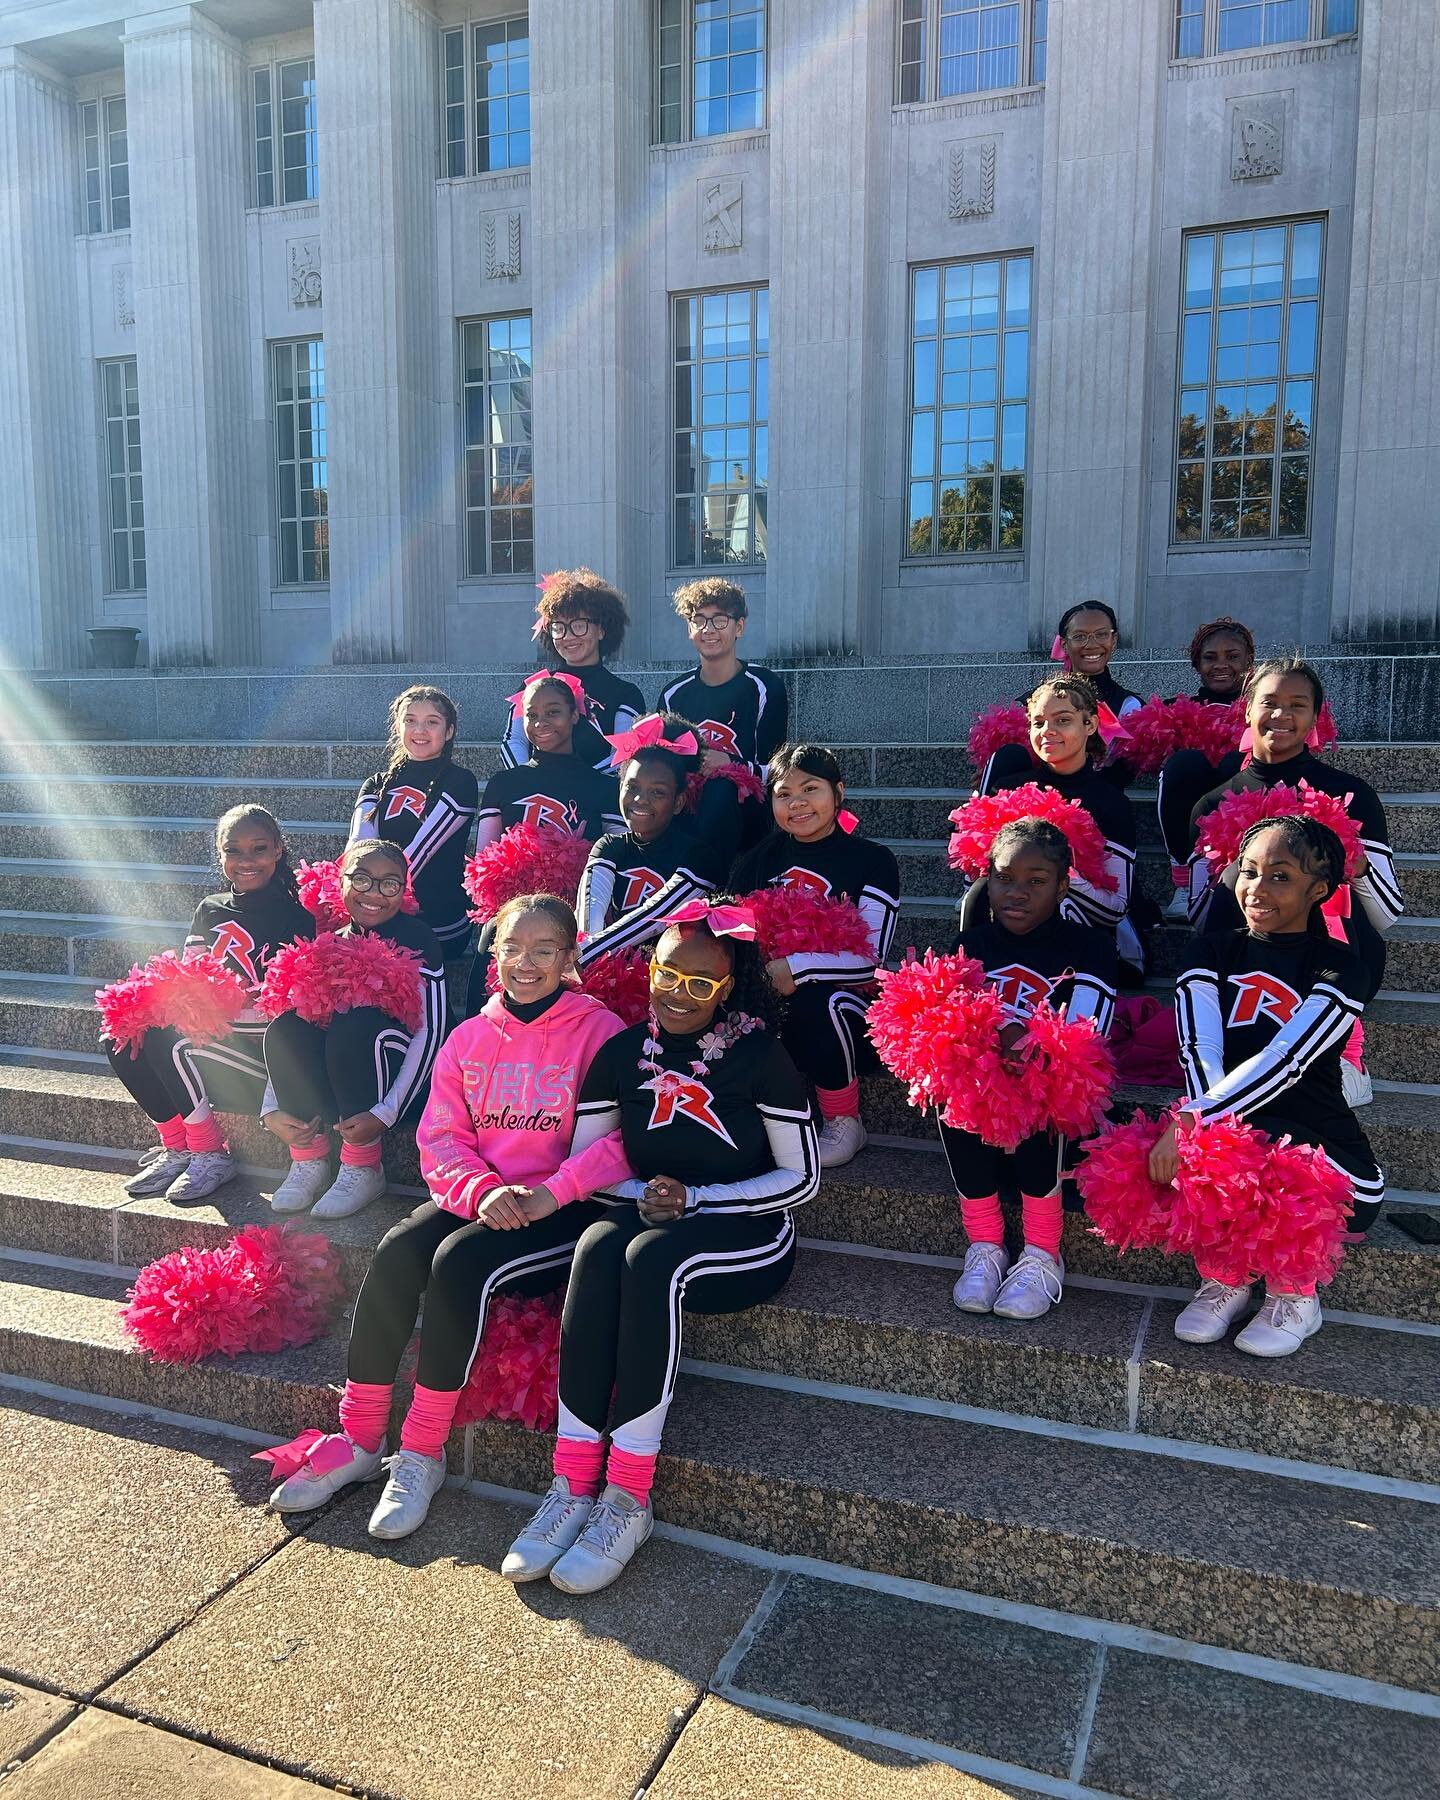 We had a wonderful time at the making Strides breast cancer walk at union Station! We had so much fun cheering along side @ritenourrhythmettes we cannot wait to do it again next year! 💕